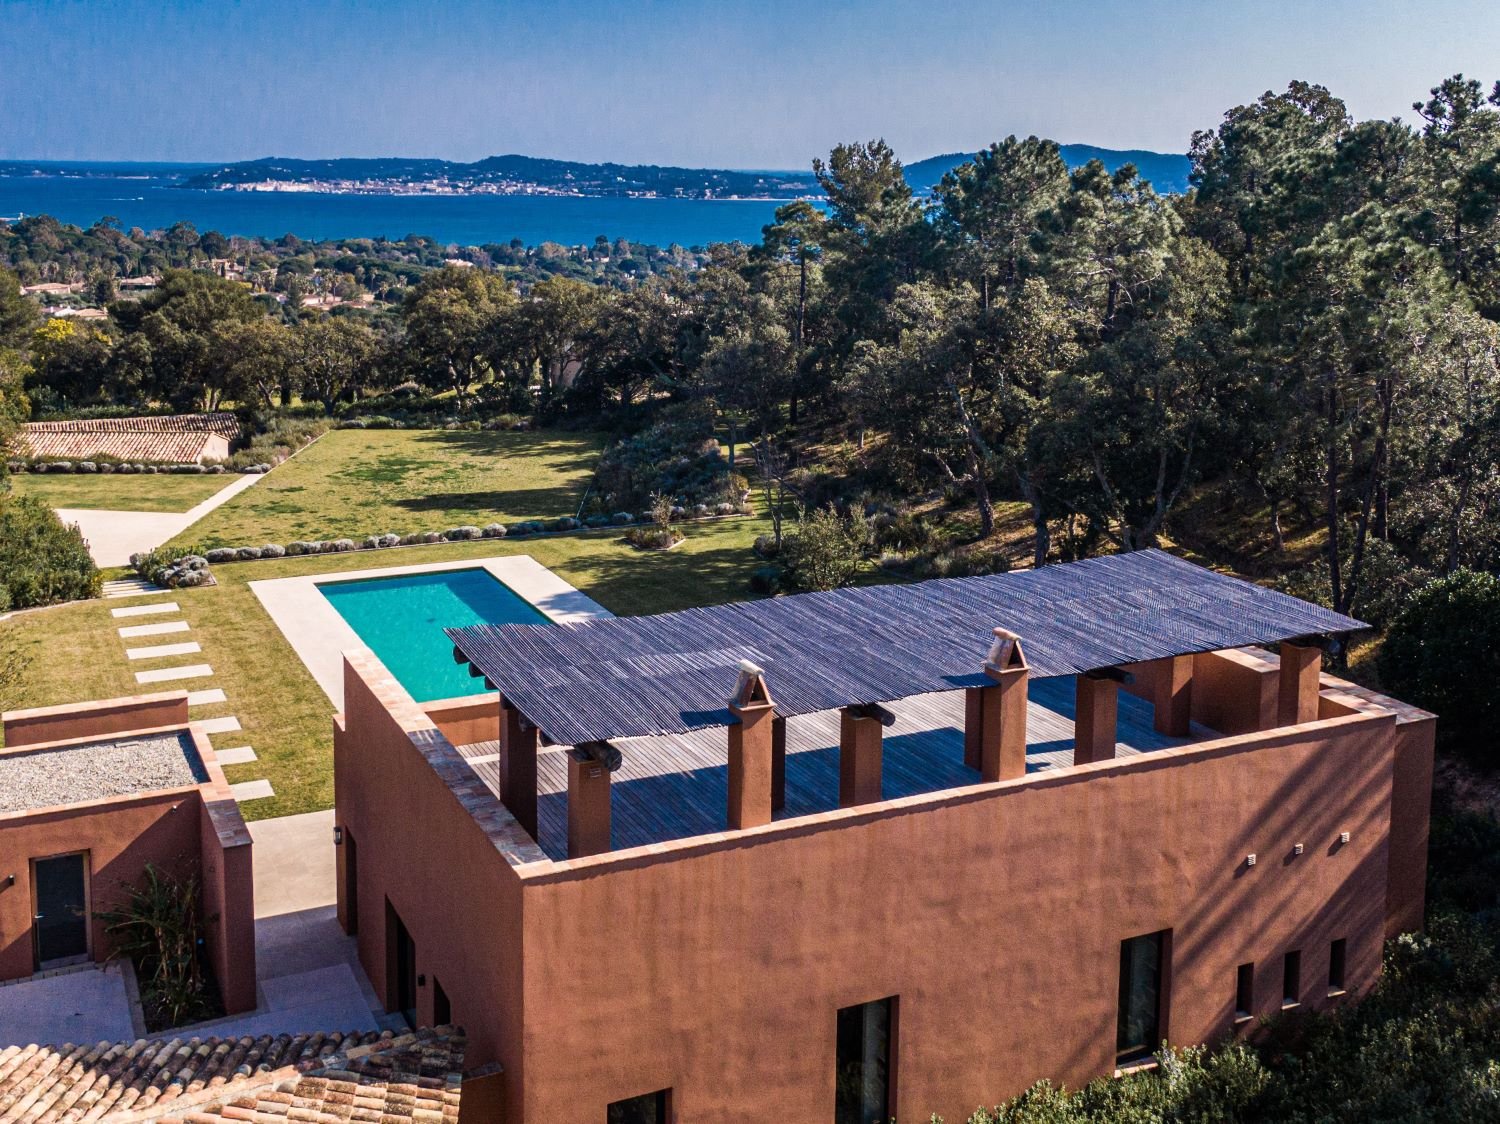 Luxury villa for rent on the cote d'azur near st tropez with sea view and large swimming pool